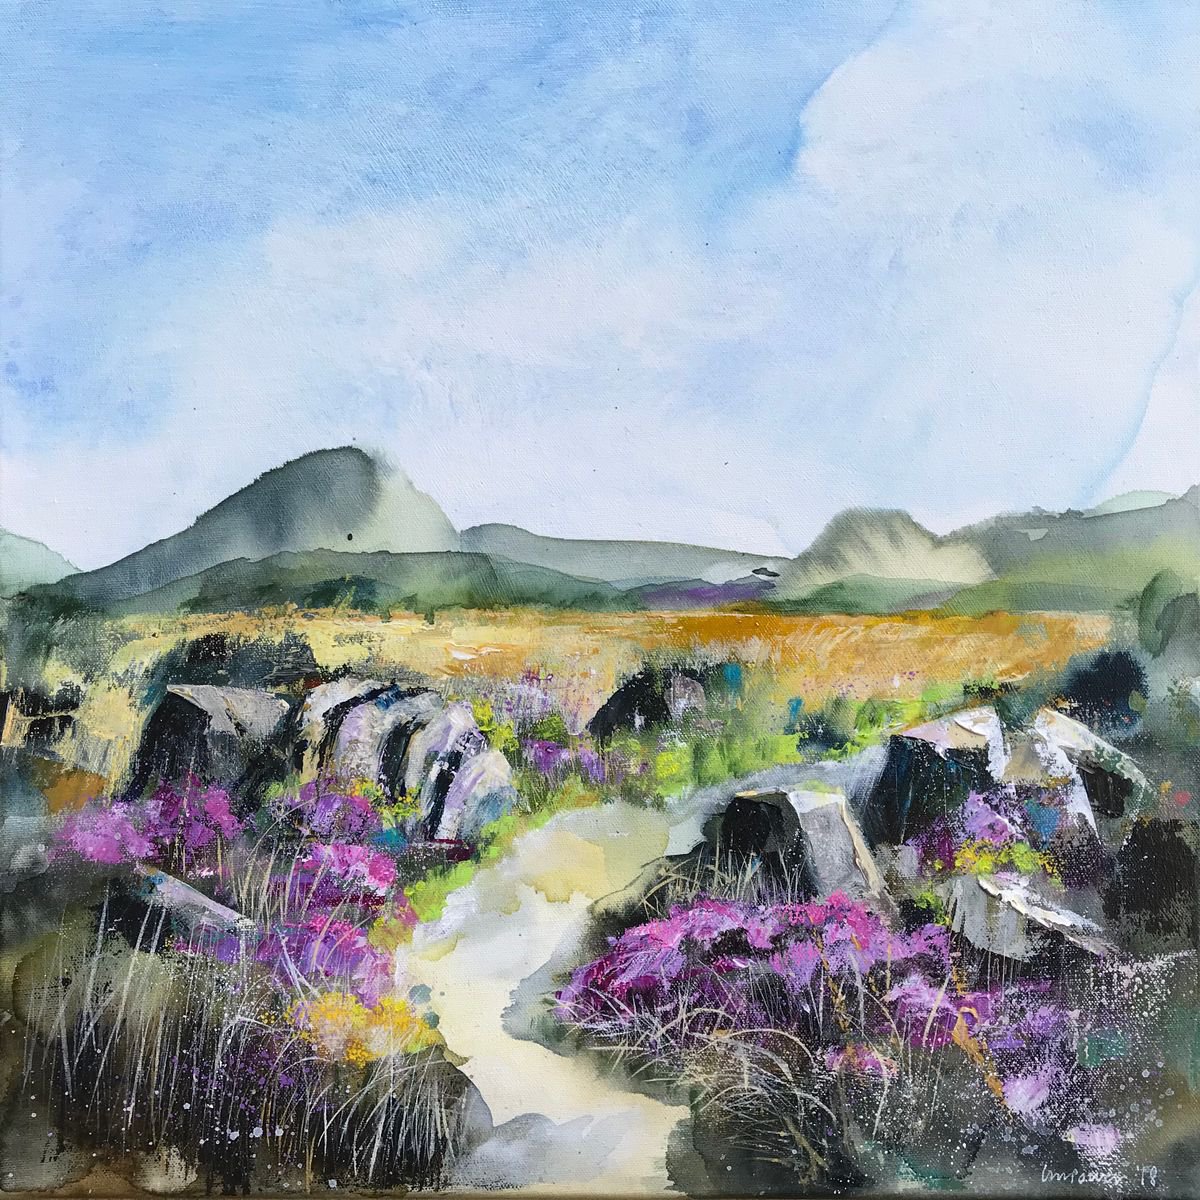 Heather Moors #01 - a Moorland landscape, 50 x 50cm by Luci Power